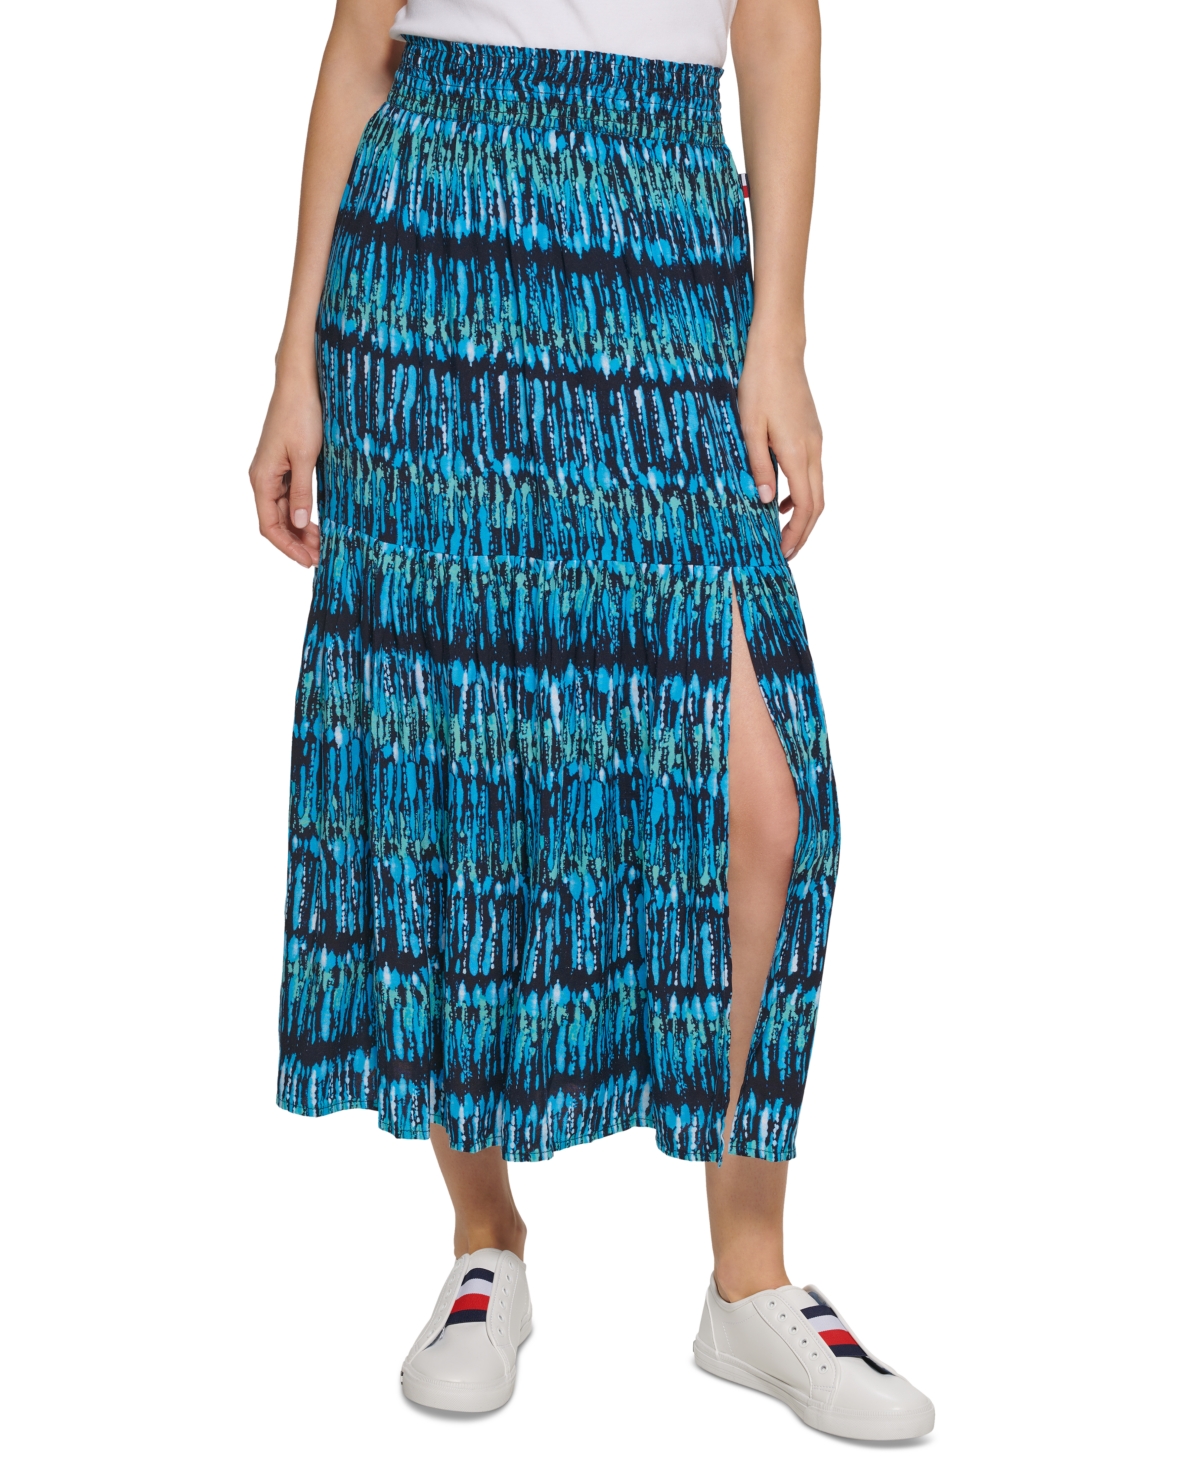 Tommy Hilfiger Women's Pull On Tiered Skirt Blue Size X-Small